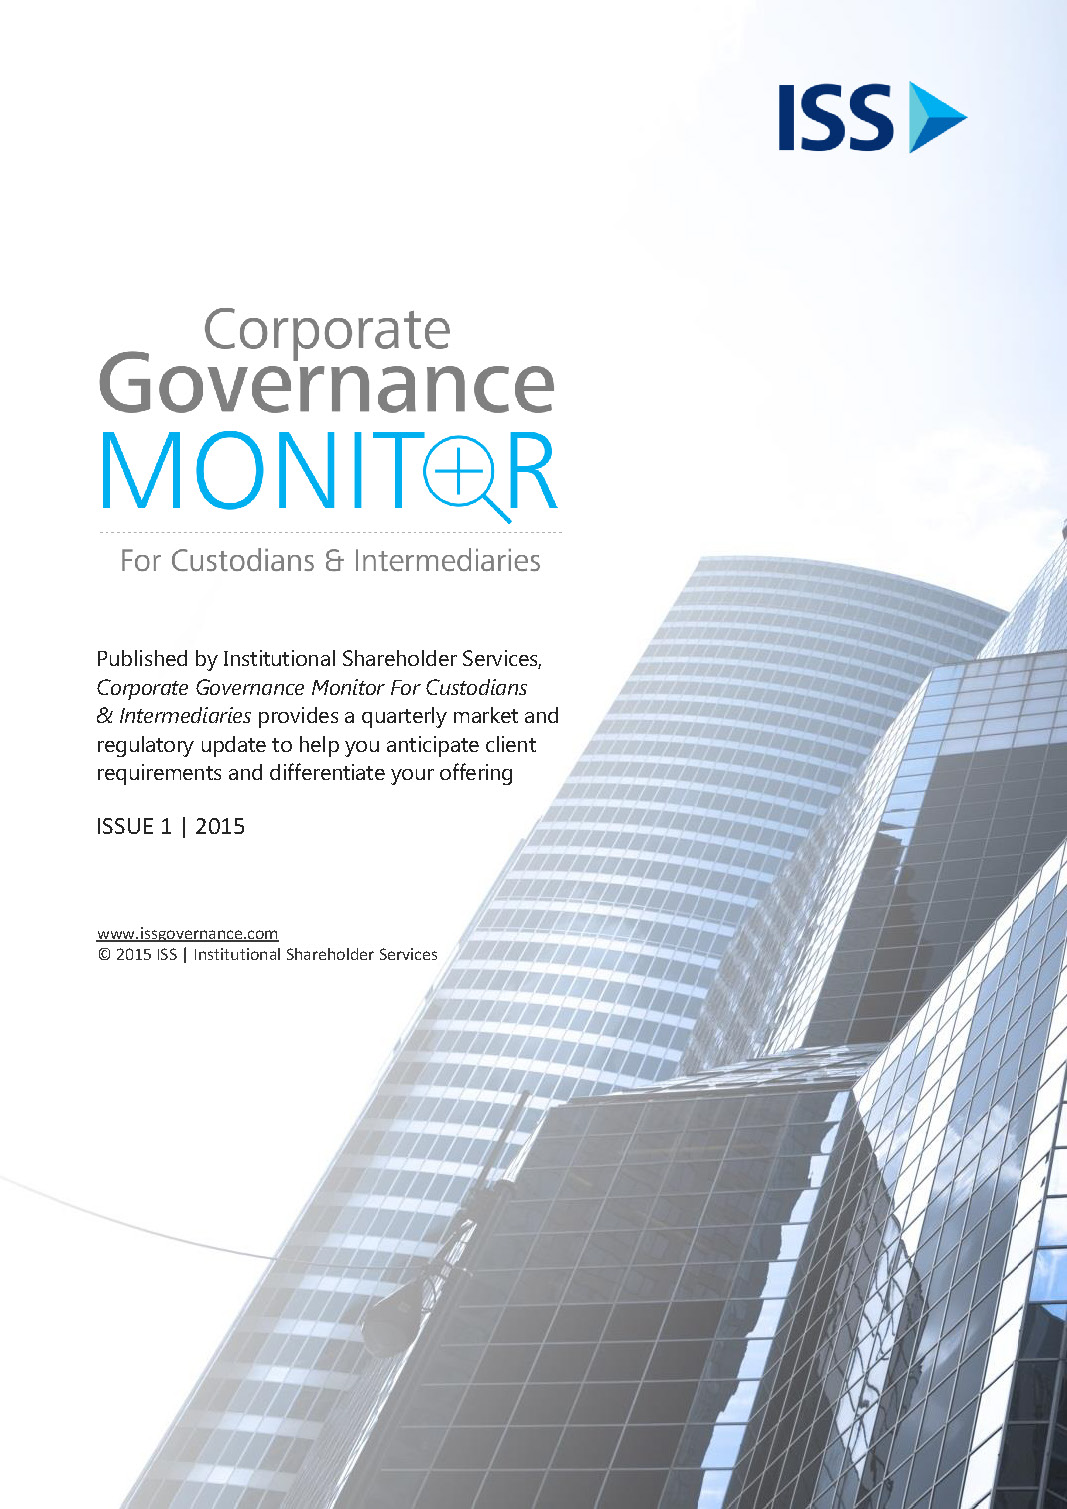 iss-corporate-governance-monitor-issue-1-cover